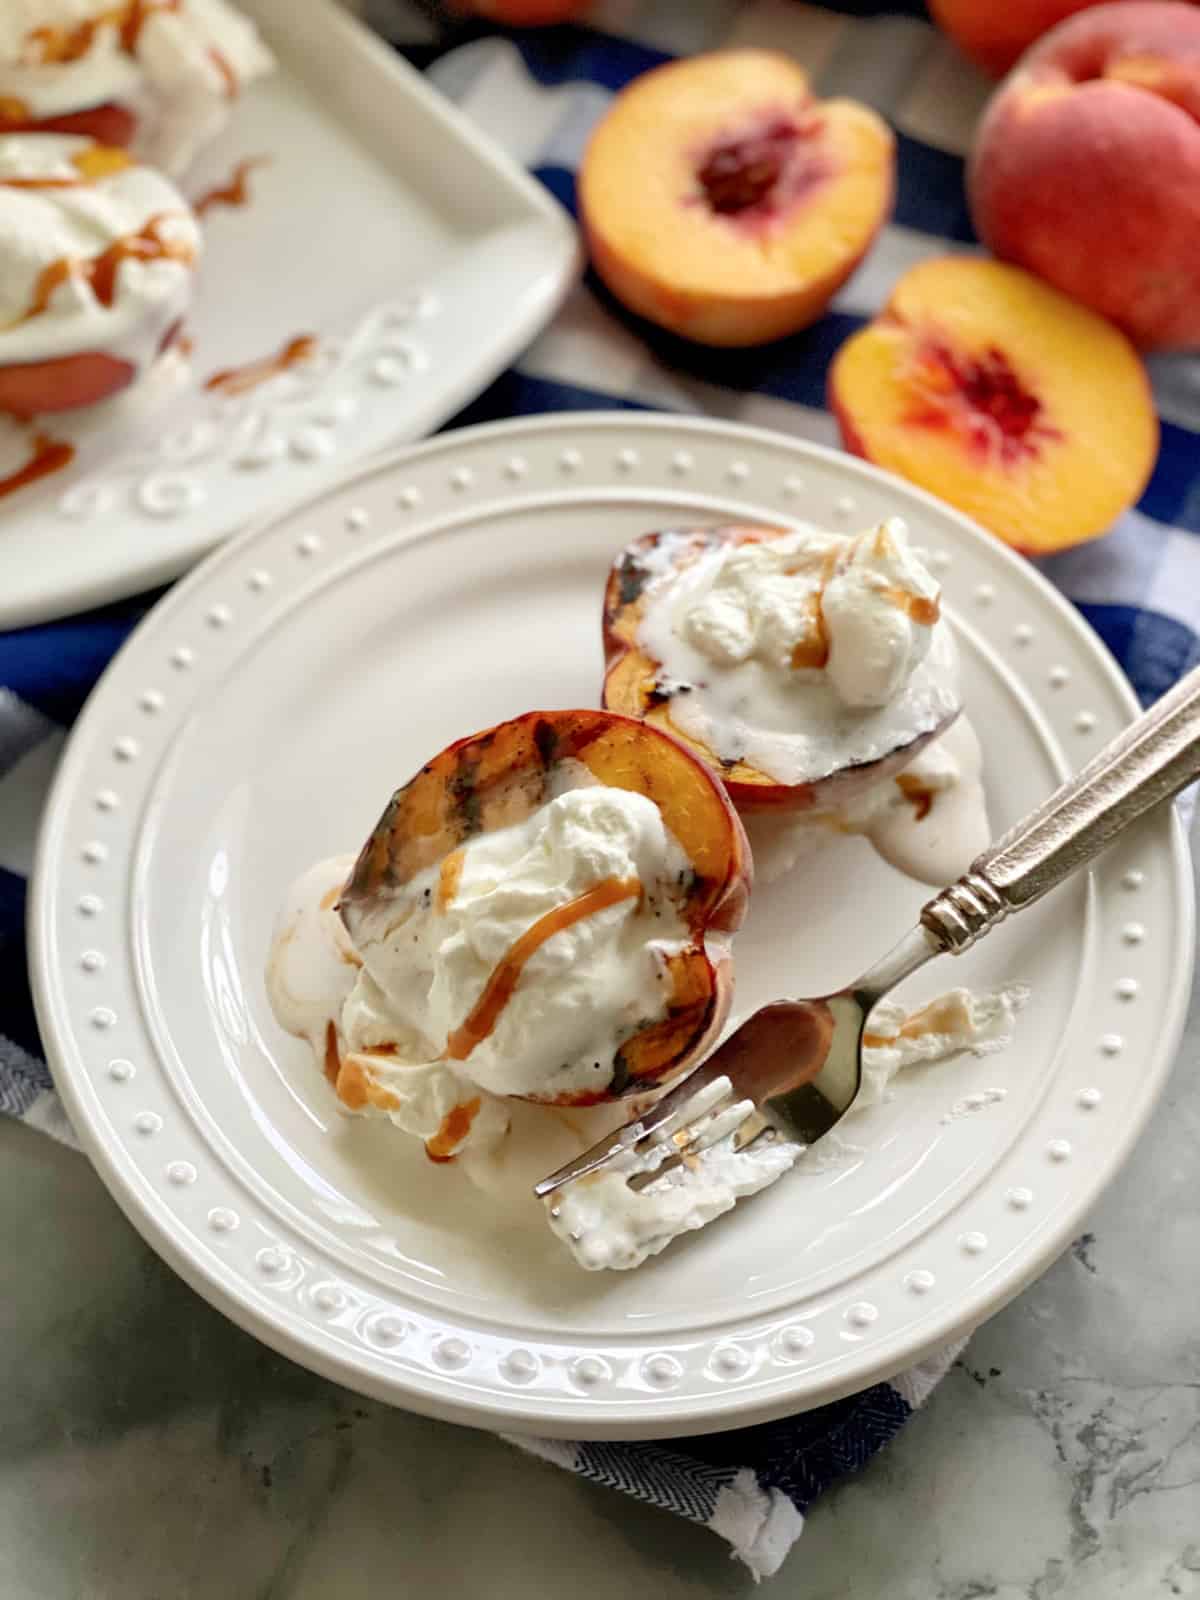 Two grilled peaches with whipped cream and caramel sauce on a white plate with a fork covered in whipped cream.